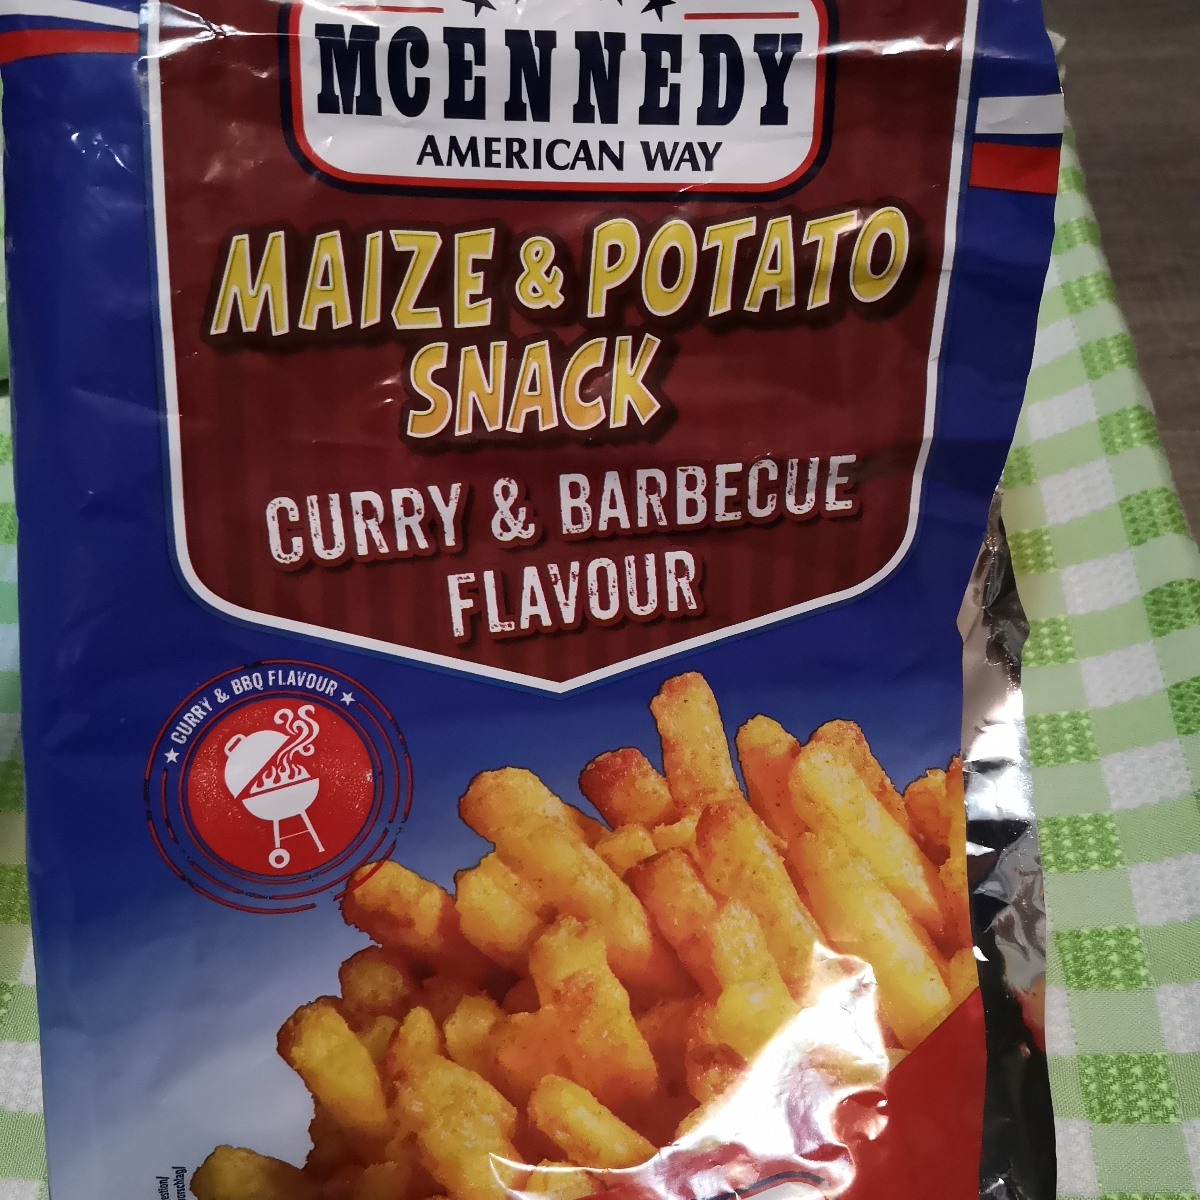 Mcennedy Maize and potato Barbecue Curry | Reviews snack abillion flavor and